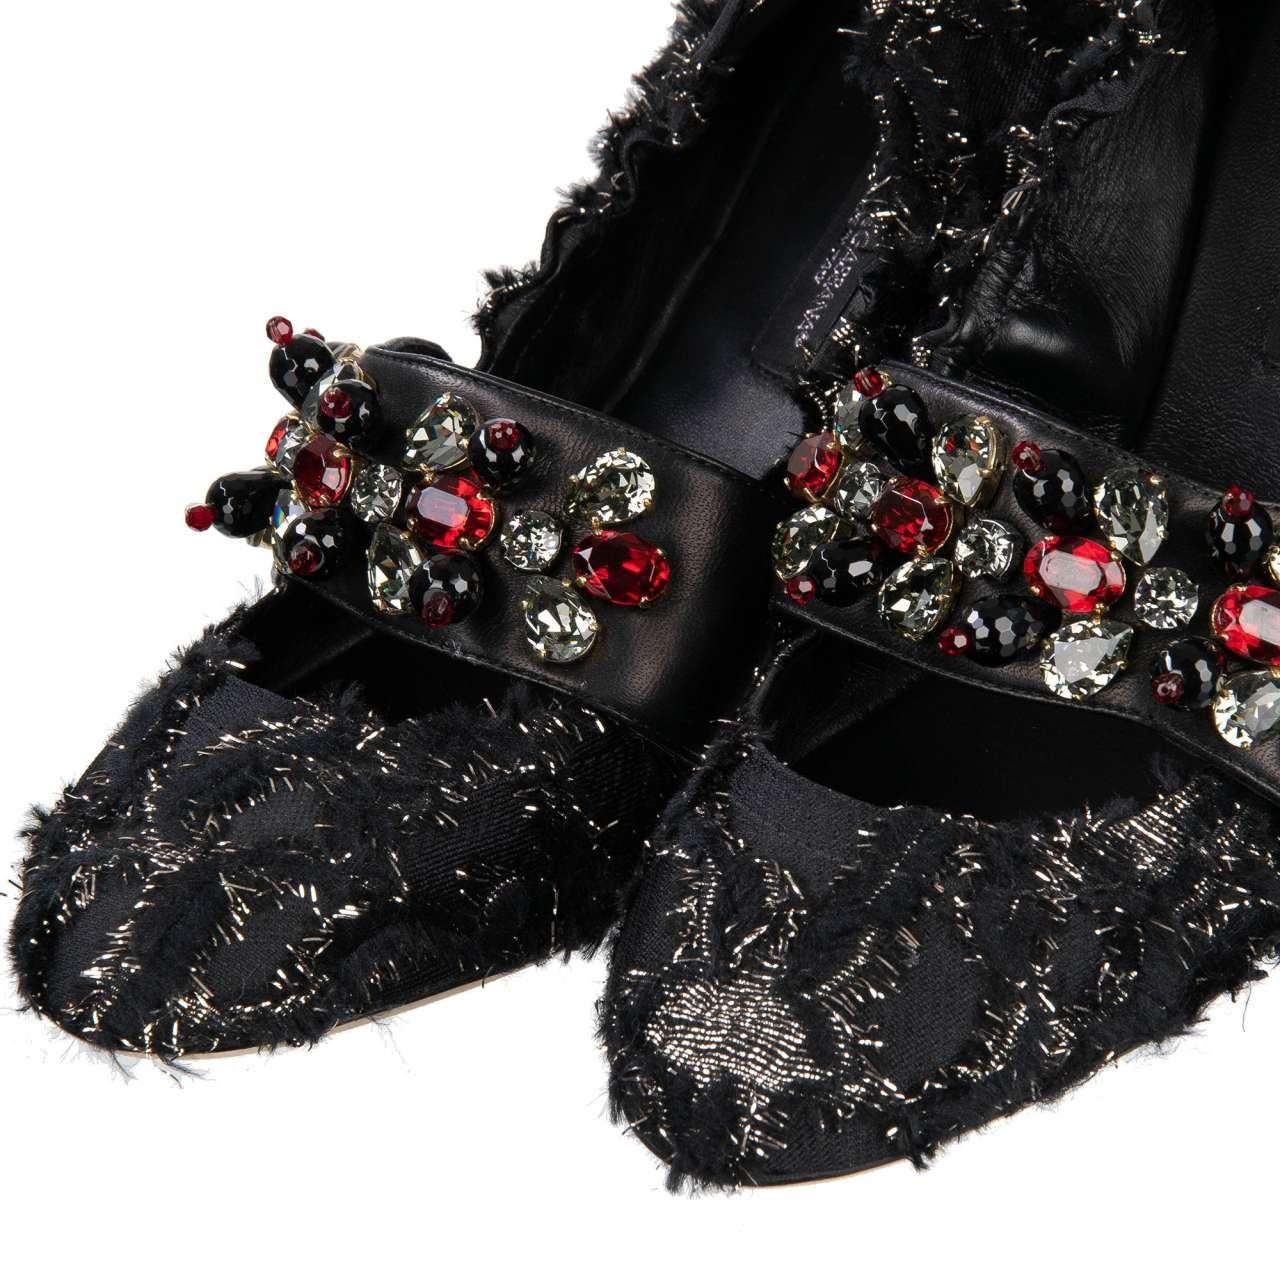 Dolce & Gabbana - Brocade Ballet Flats VALLY with Crystals EUR 38 For Sale 2